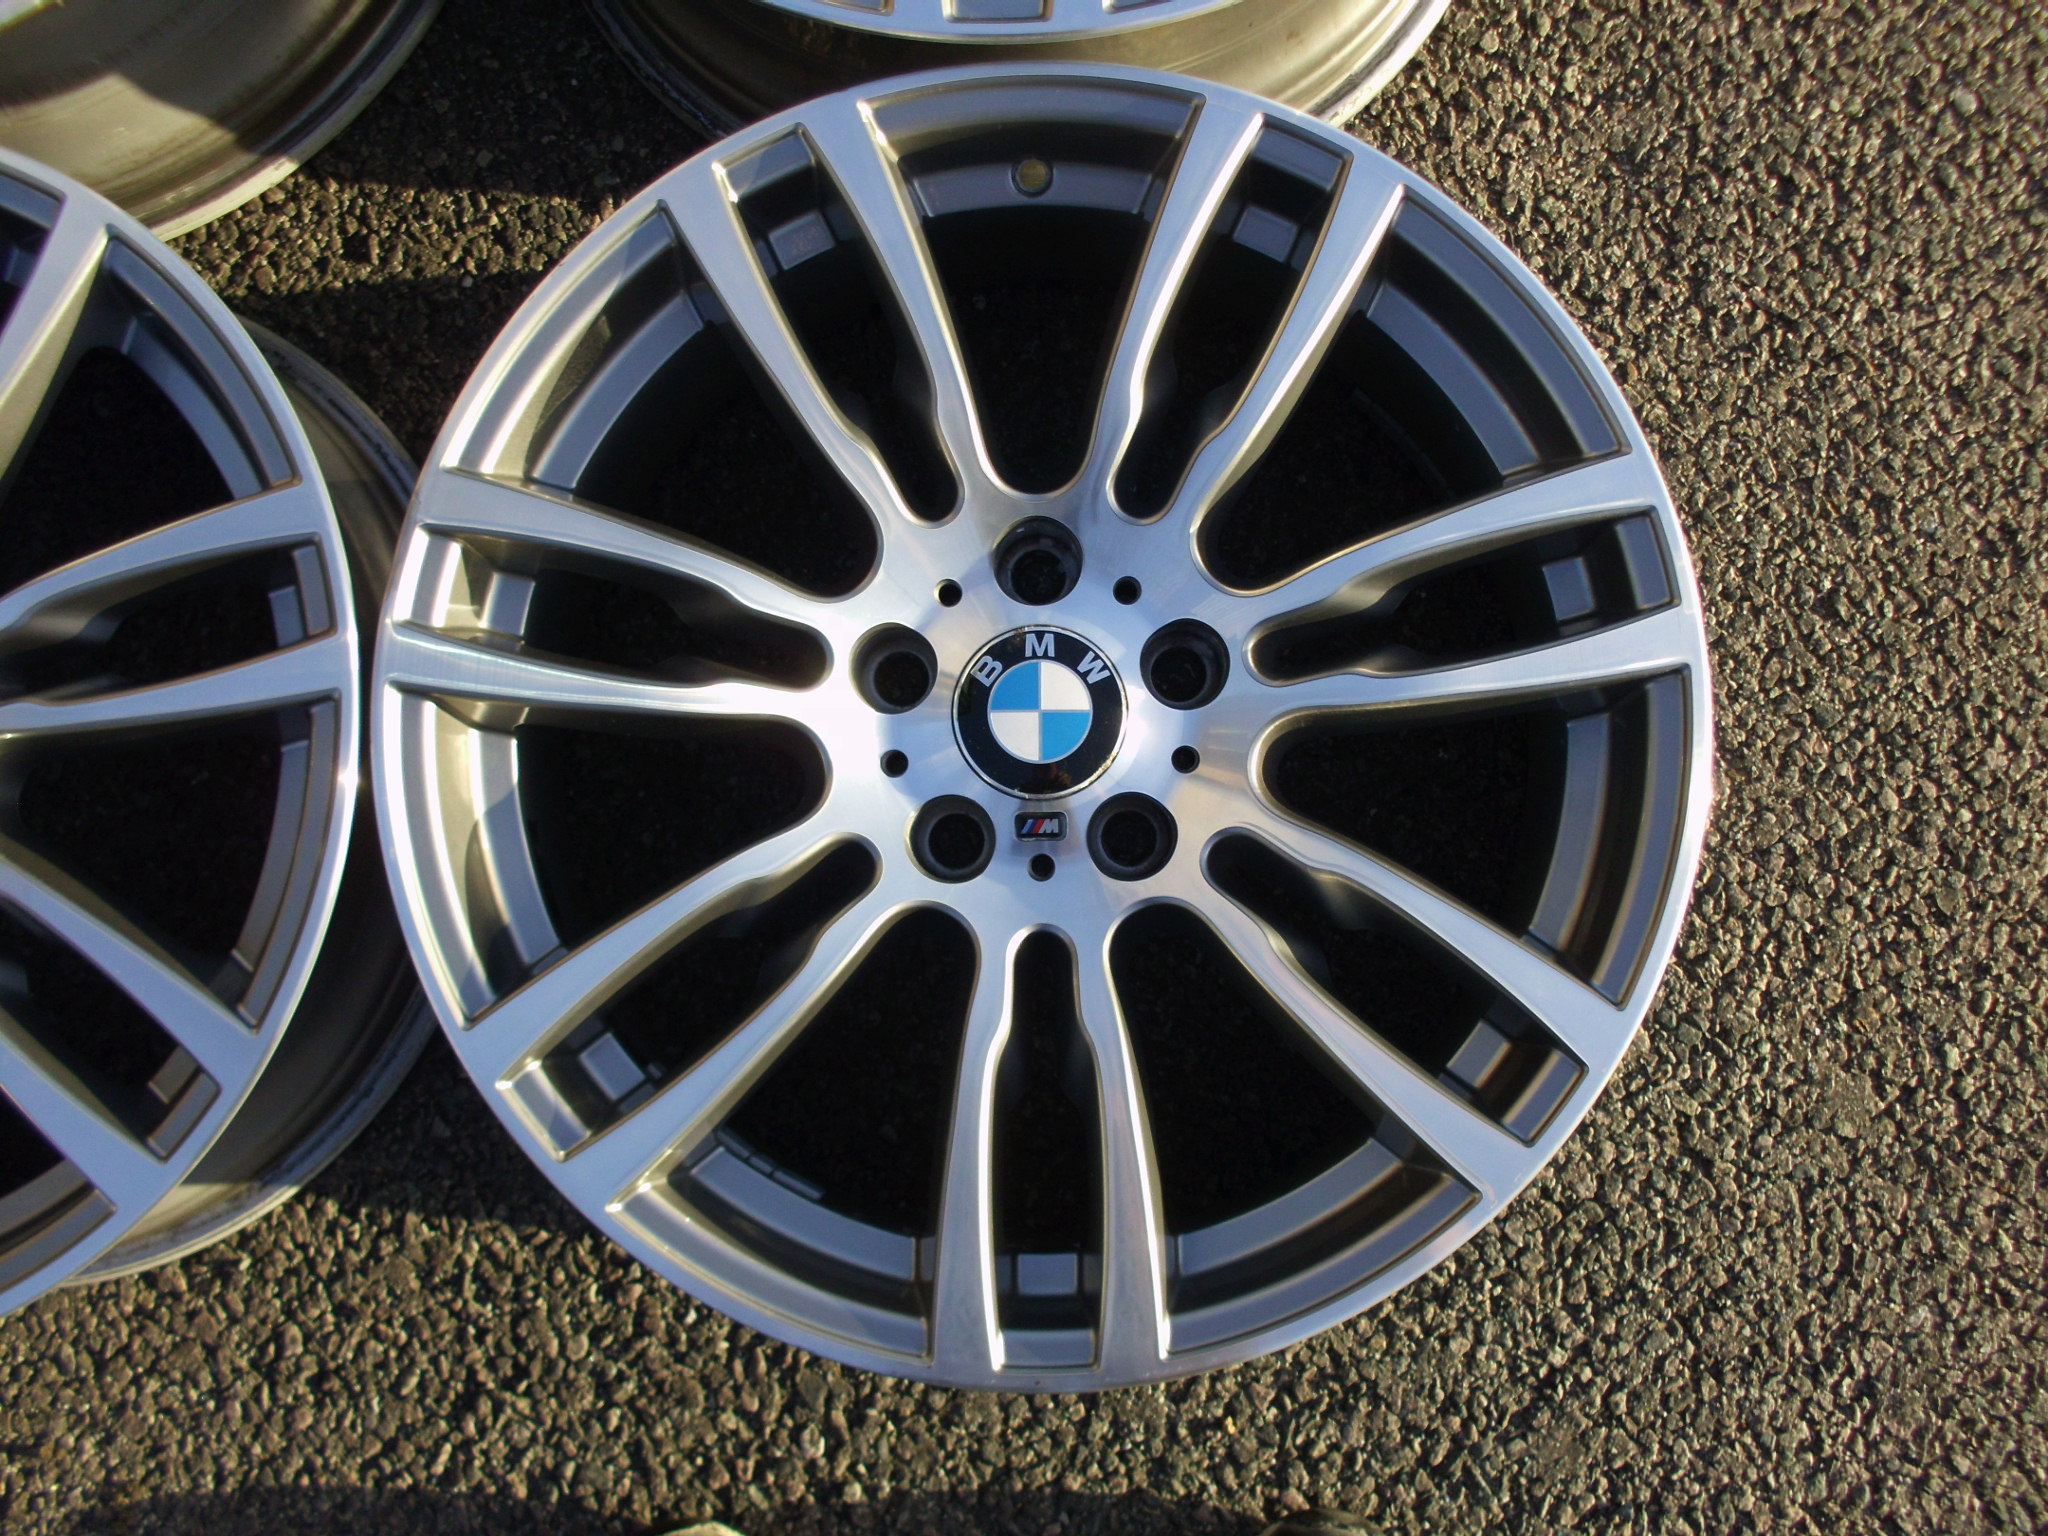 USED 19" GENUINE BMW STYLE 403 DOUBLE SPOKE F30 M SPORT ALLOY WHEELS ,EXCELLENT ORIGINAL CONDITION,WIDE REAR